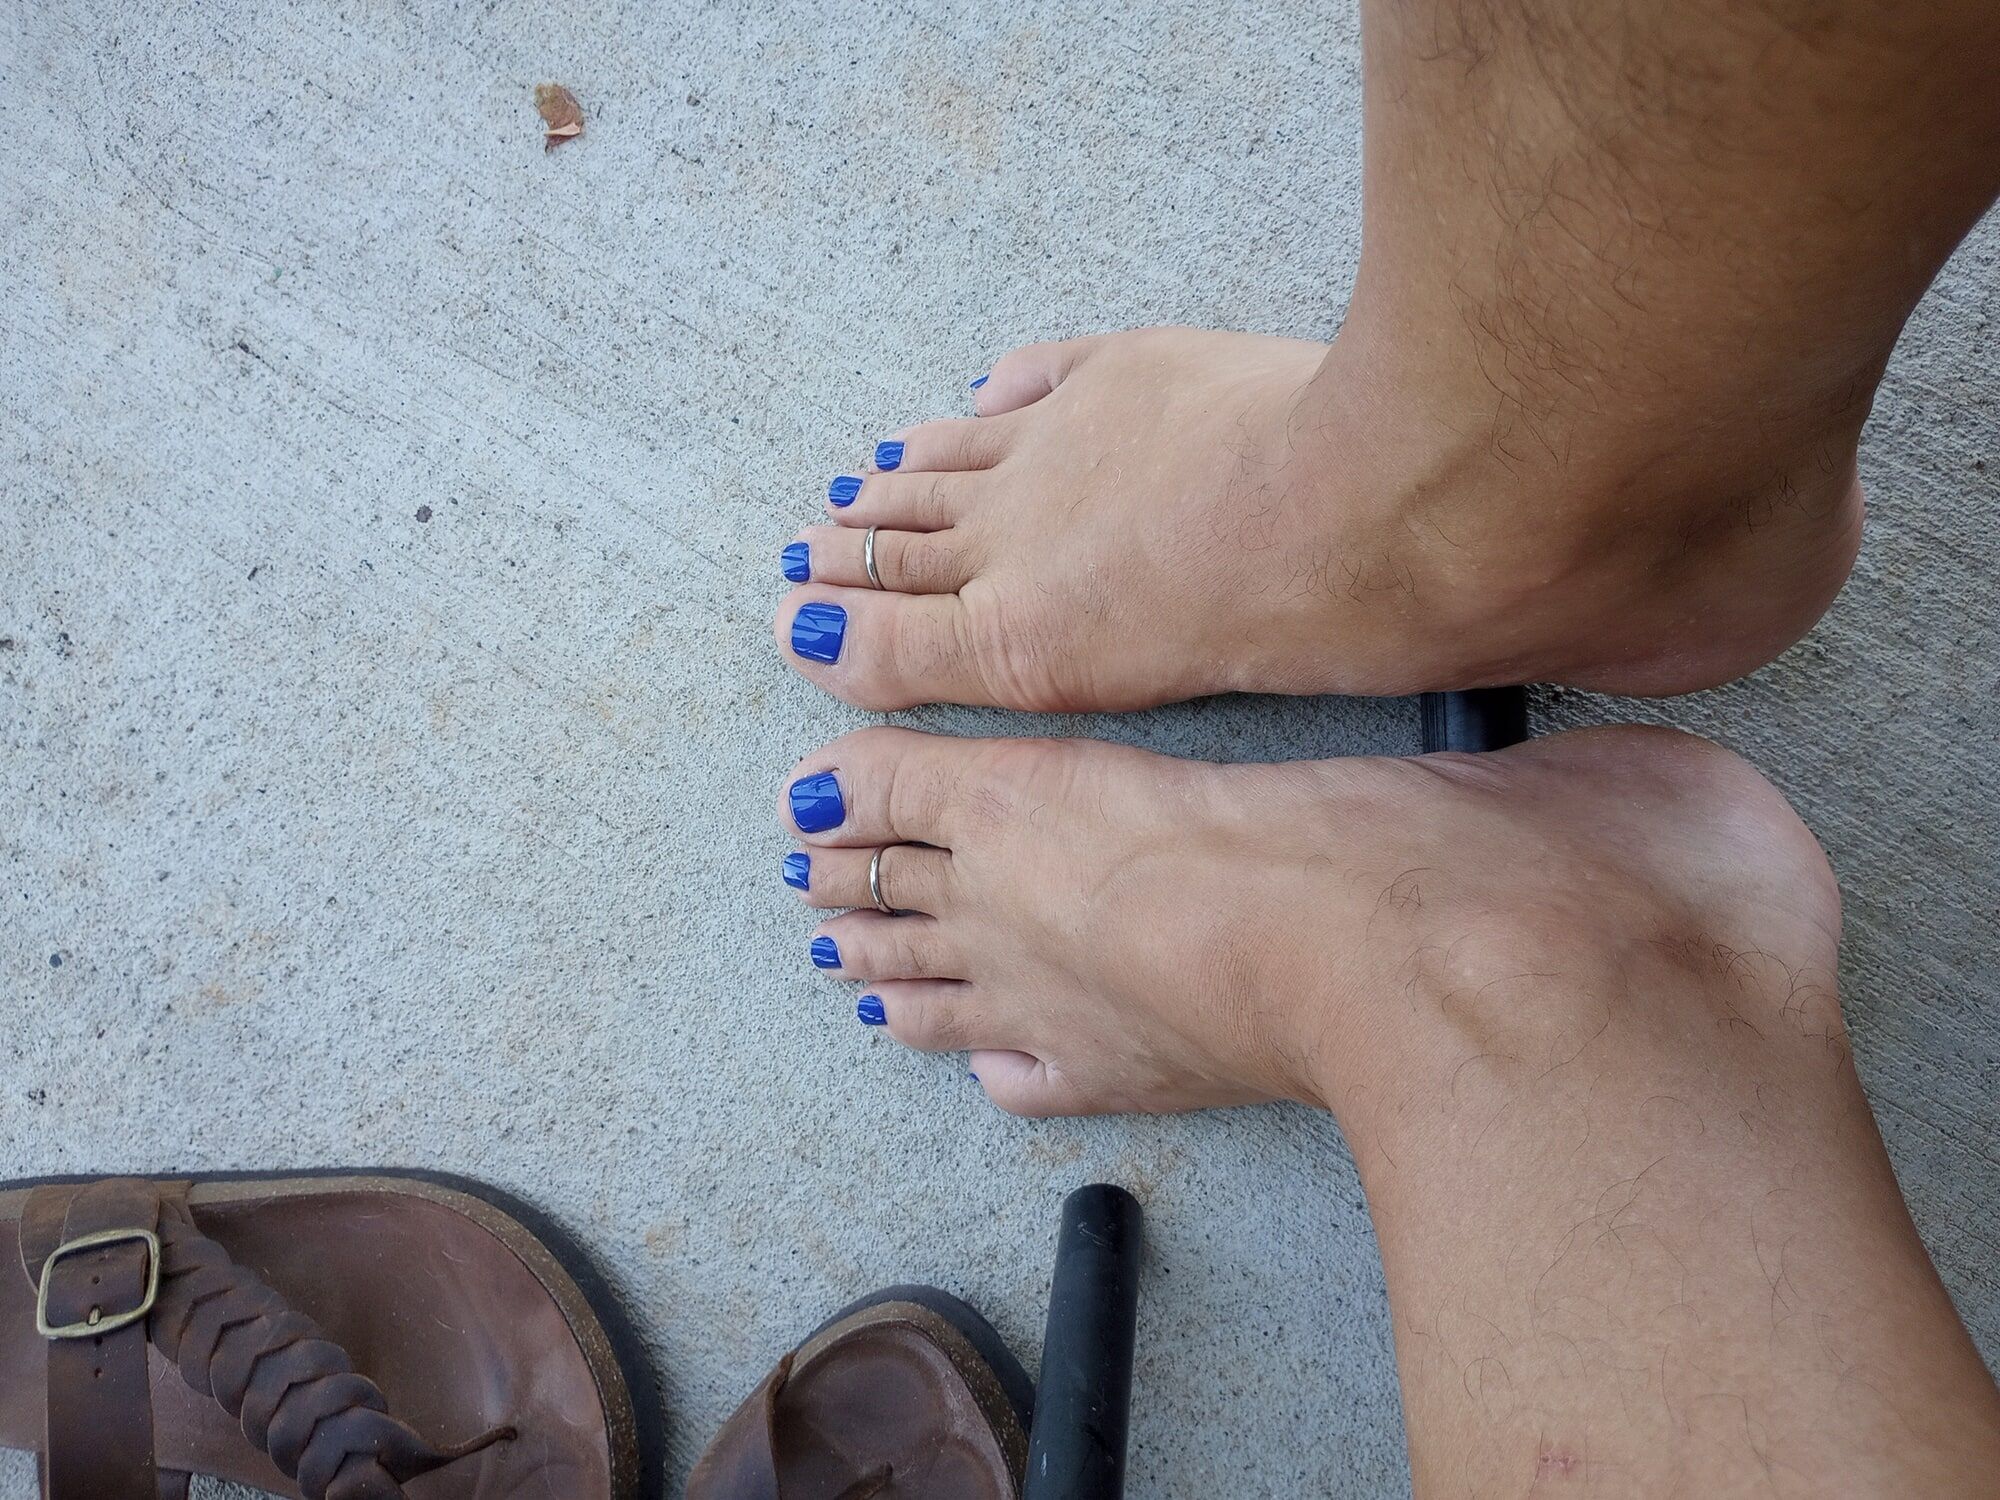 Showing off my new pedicure